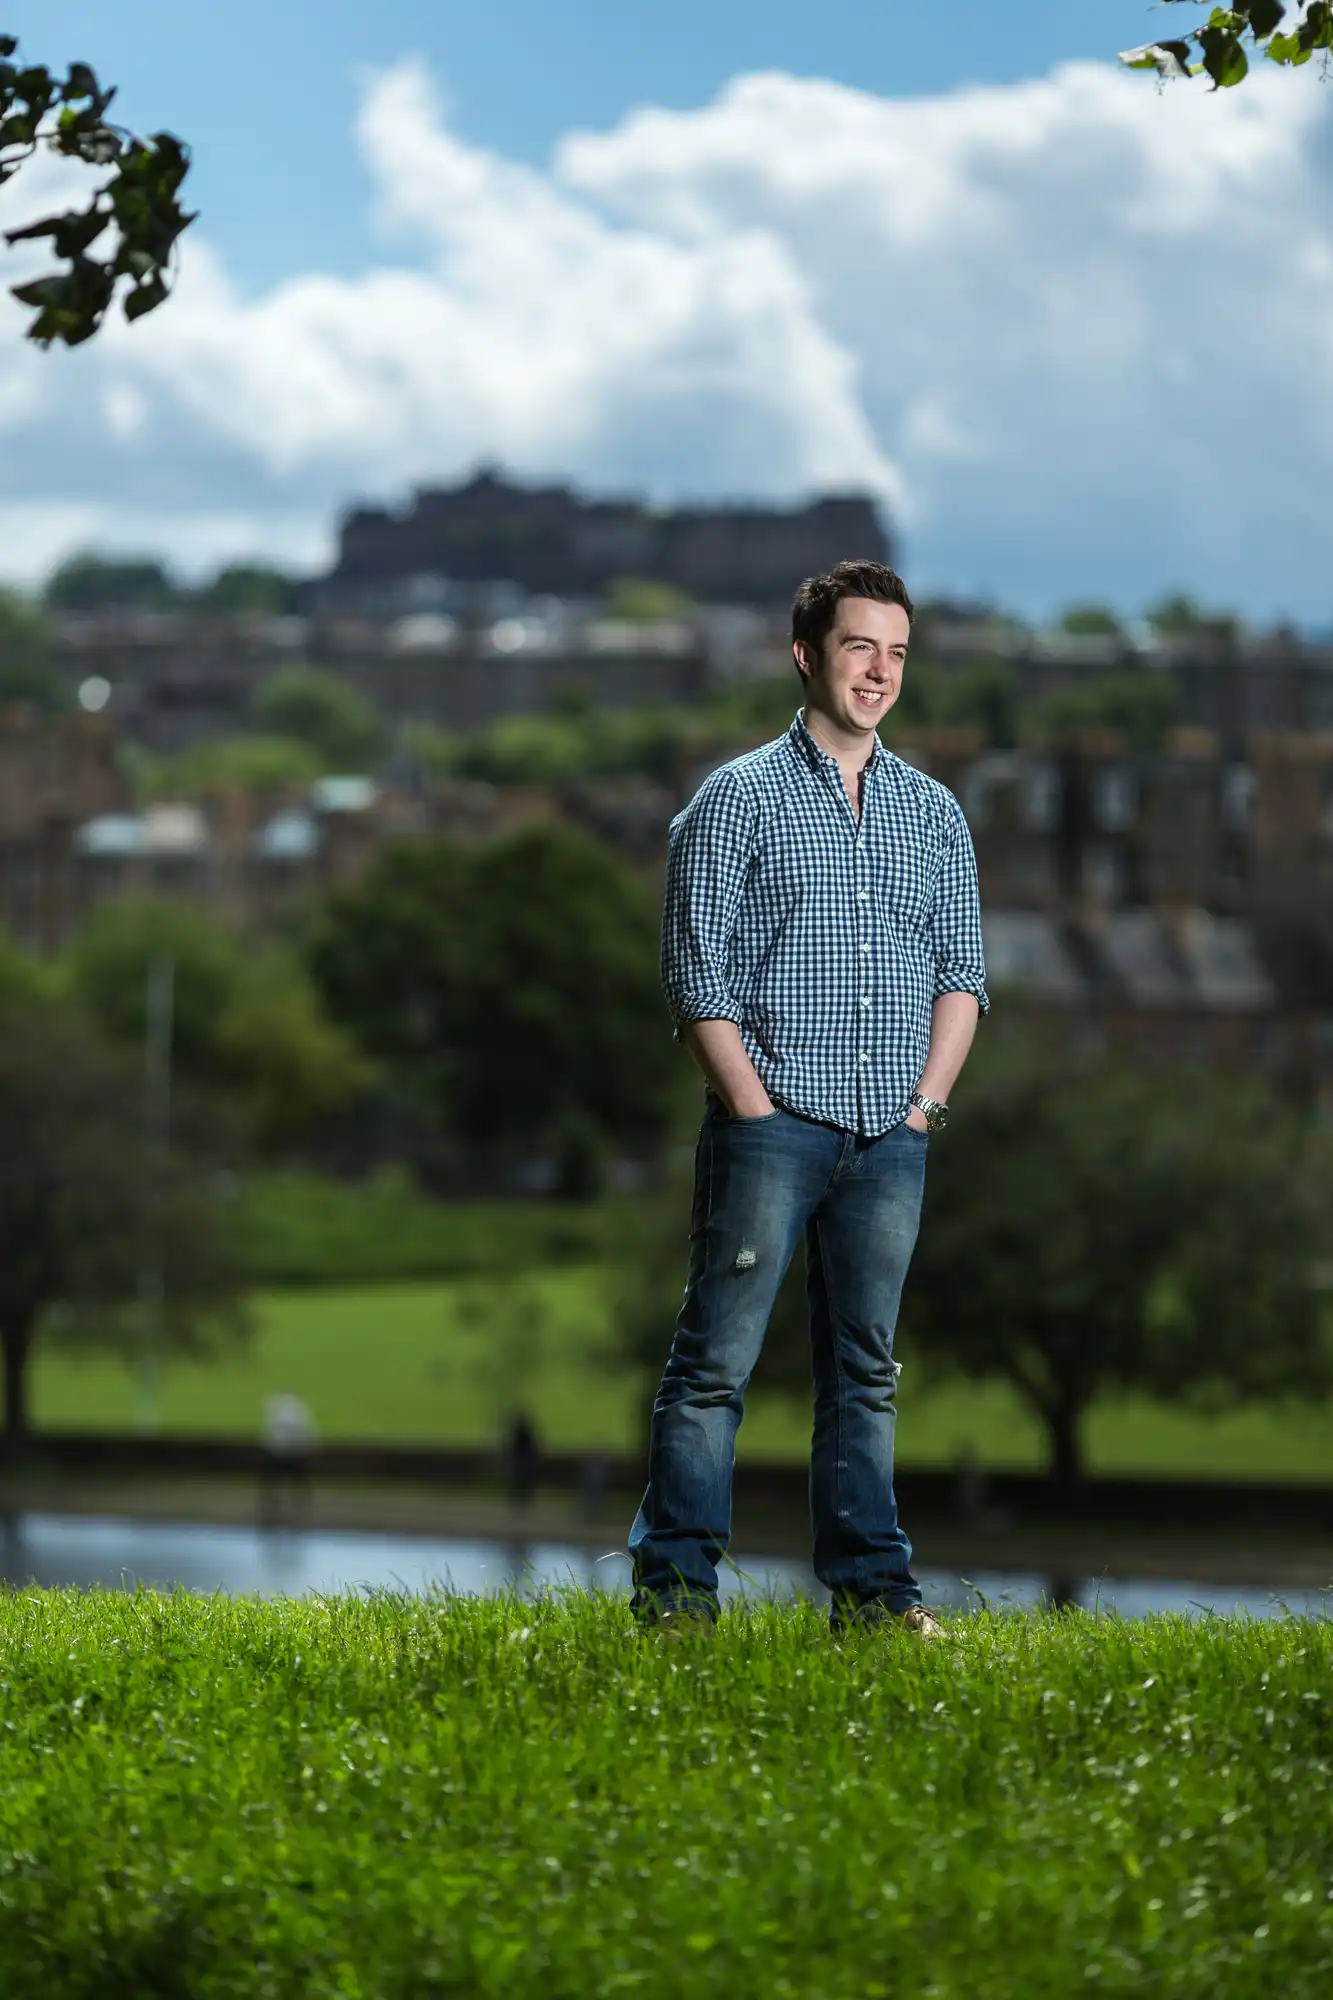 A young man in a checked shirt and jeans stands smiling in a park, with a castle on a hill visible in the background.